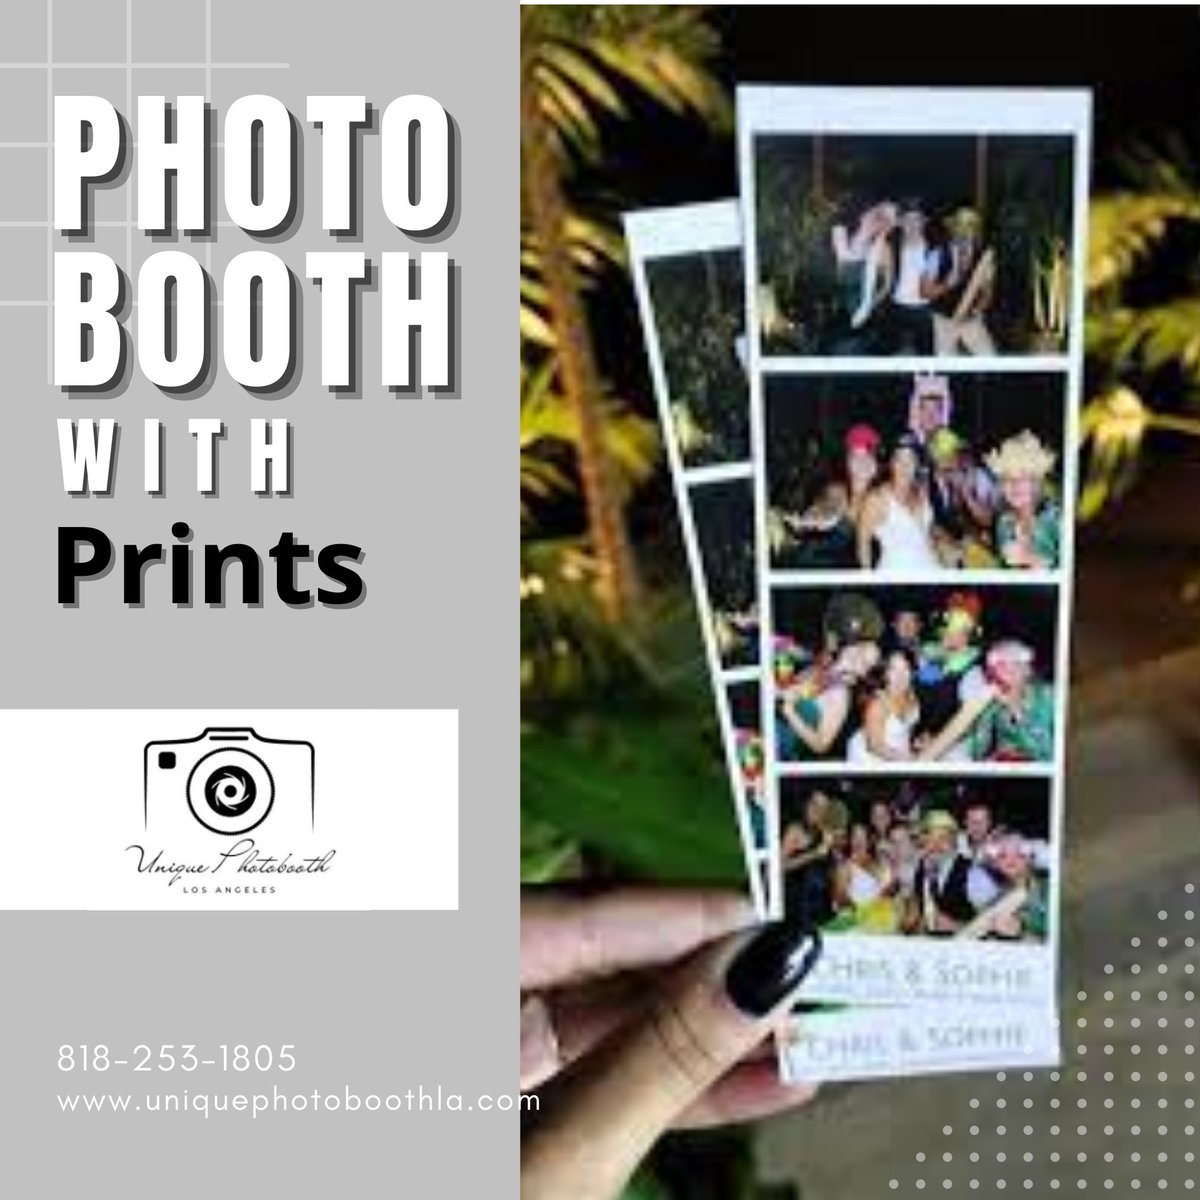 Our Photobooth is designed to create heartwarming memories with friends, family, and loved ones. 
#360photobooth #photoboothrental #weddingphotobooth #partyrental #eventphotobooth #photoboothforrent #photobooth #Losangeles #balloons #flowers #SanFernandovalley #audioguestbook